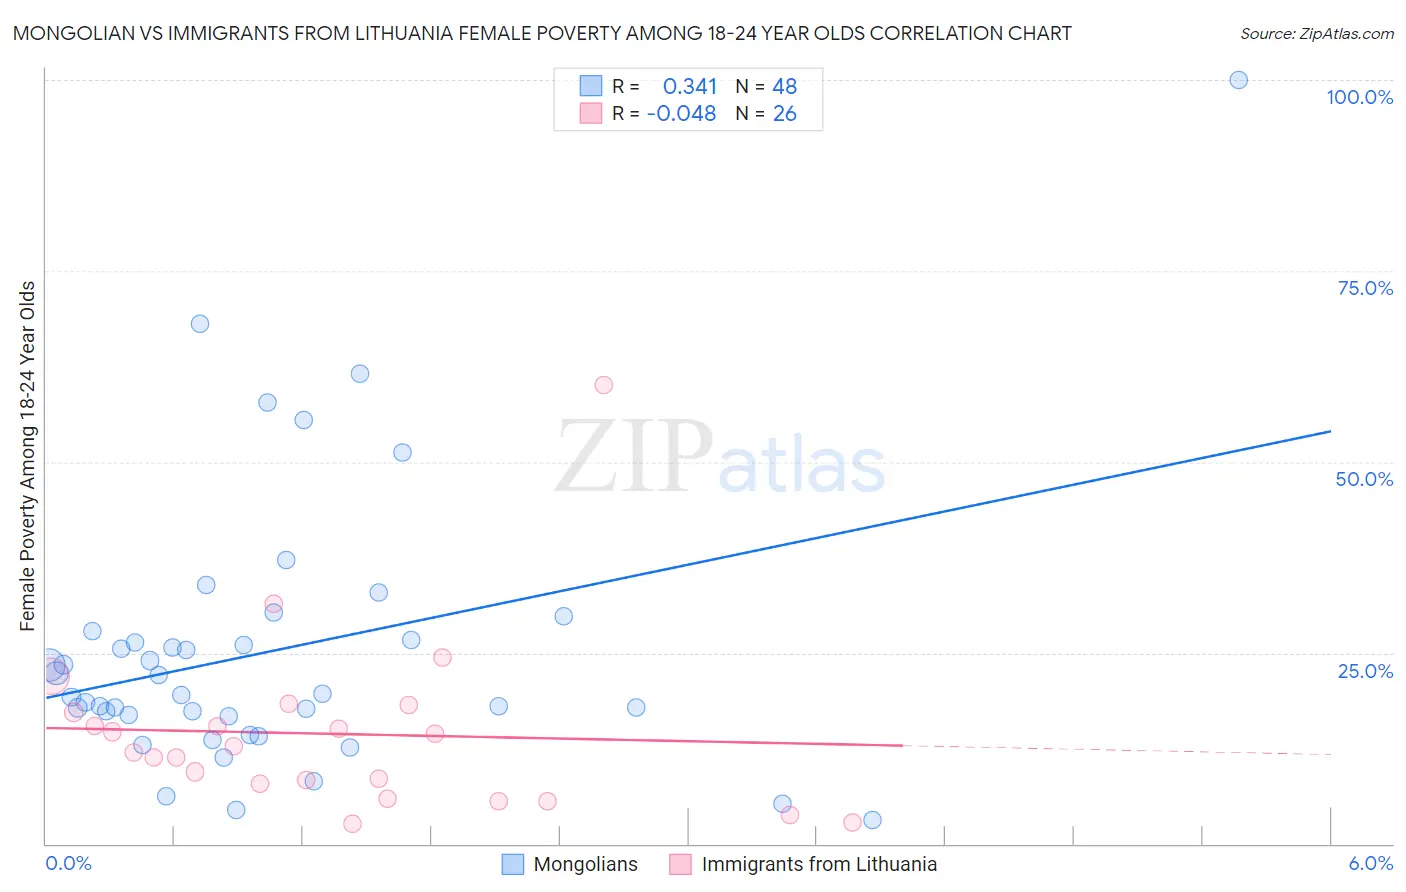 Mongolian vs Immigrants from Lithuania Female Poverty Among 18-24 Year Olds